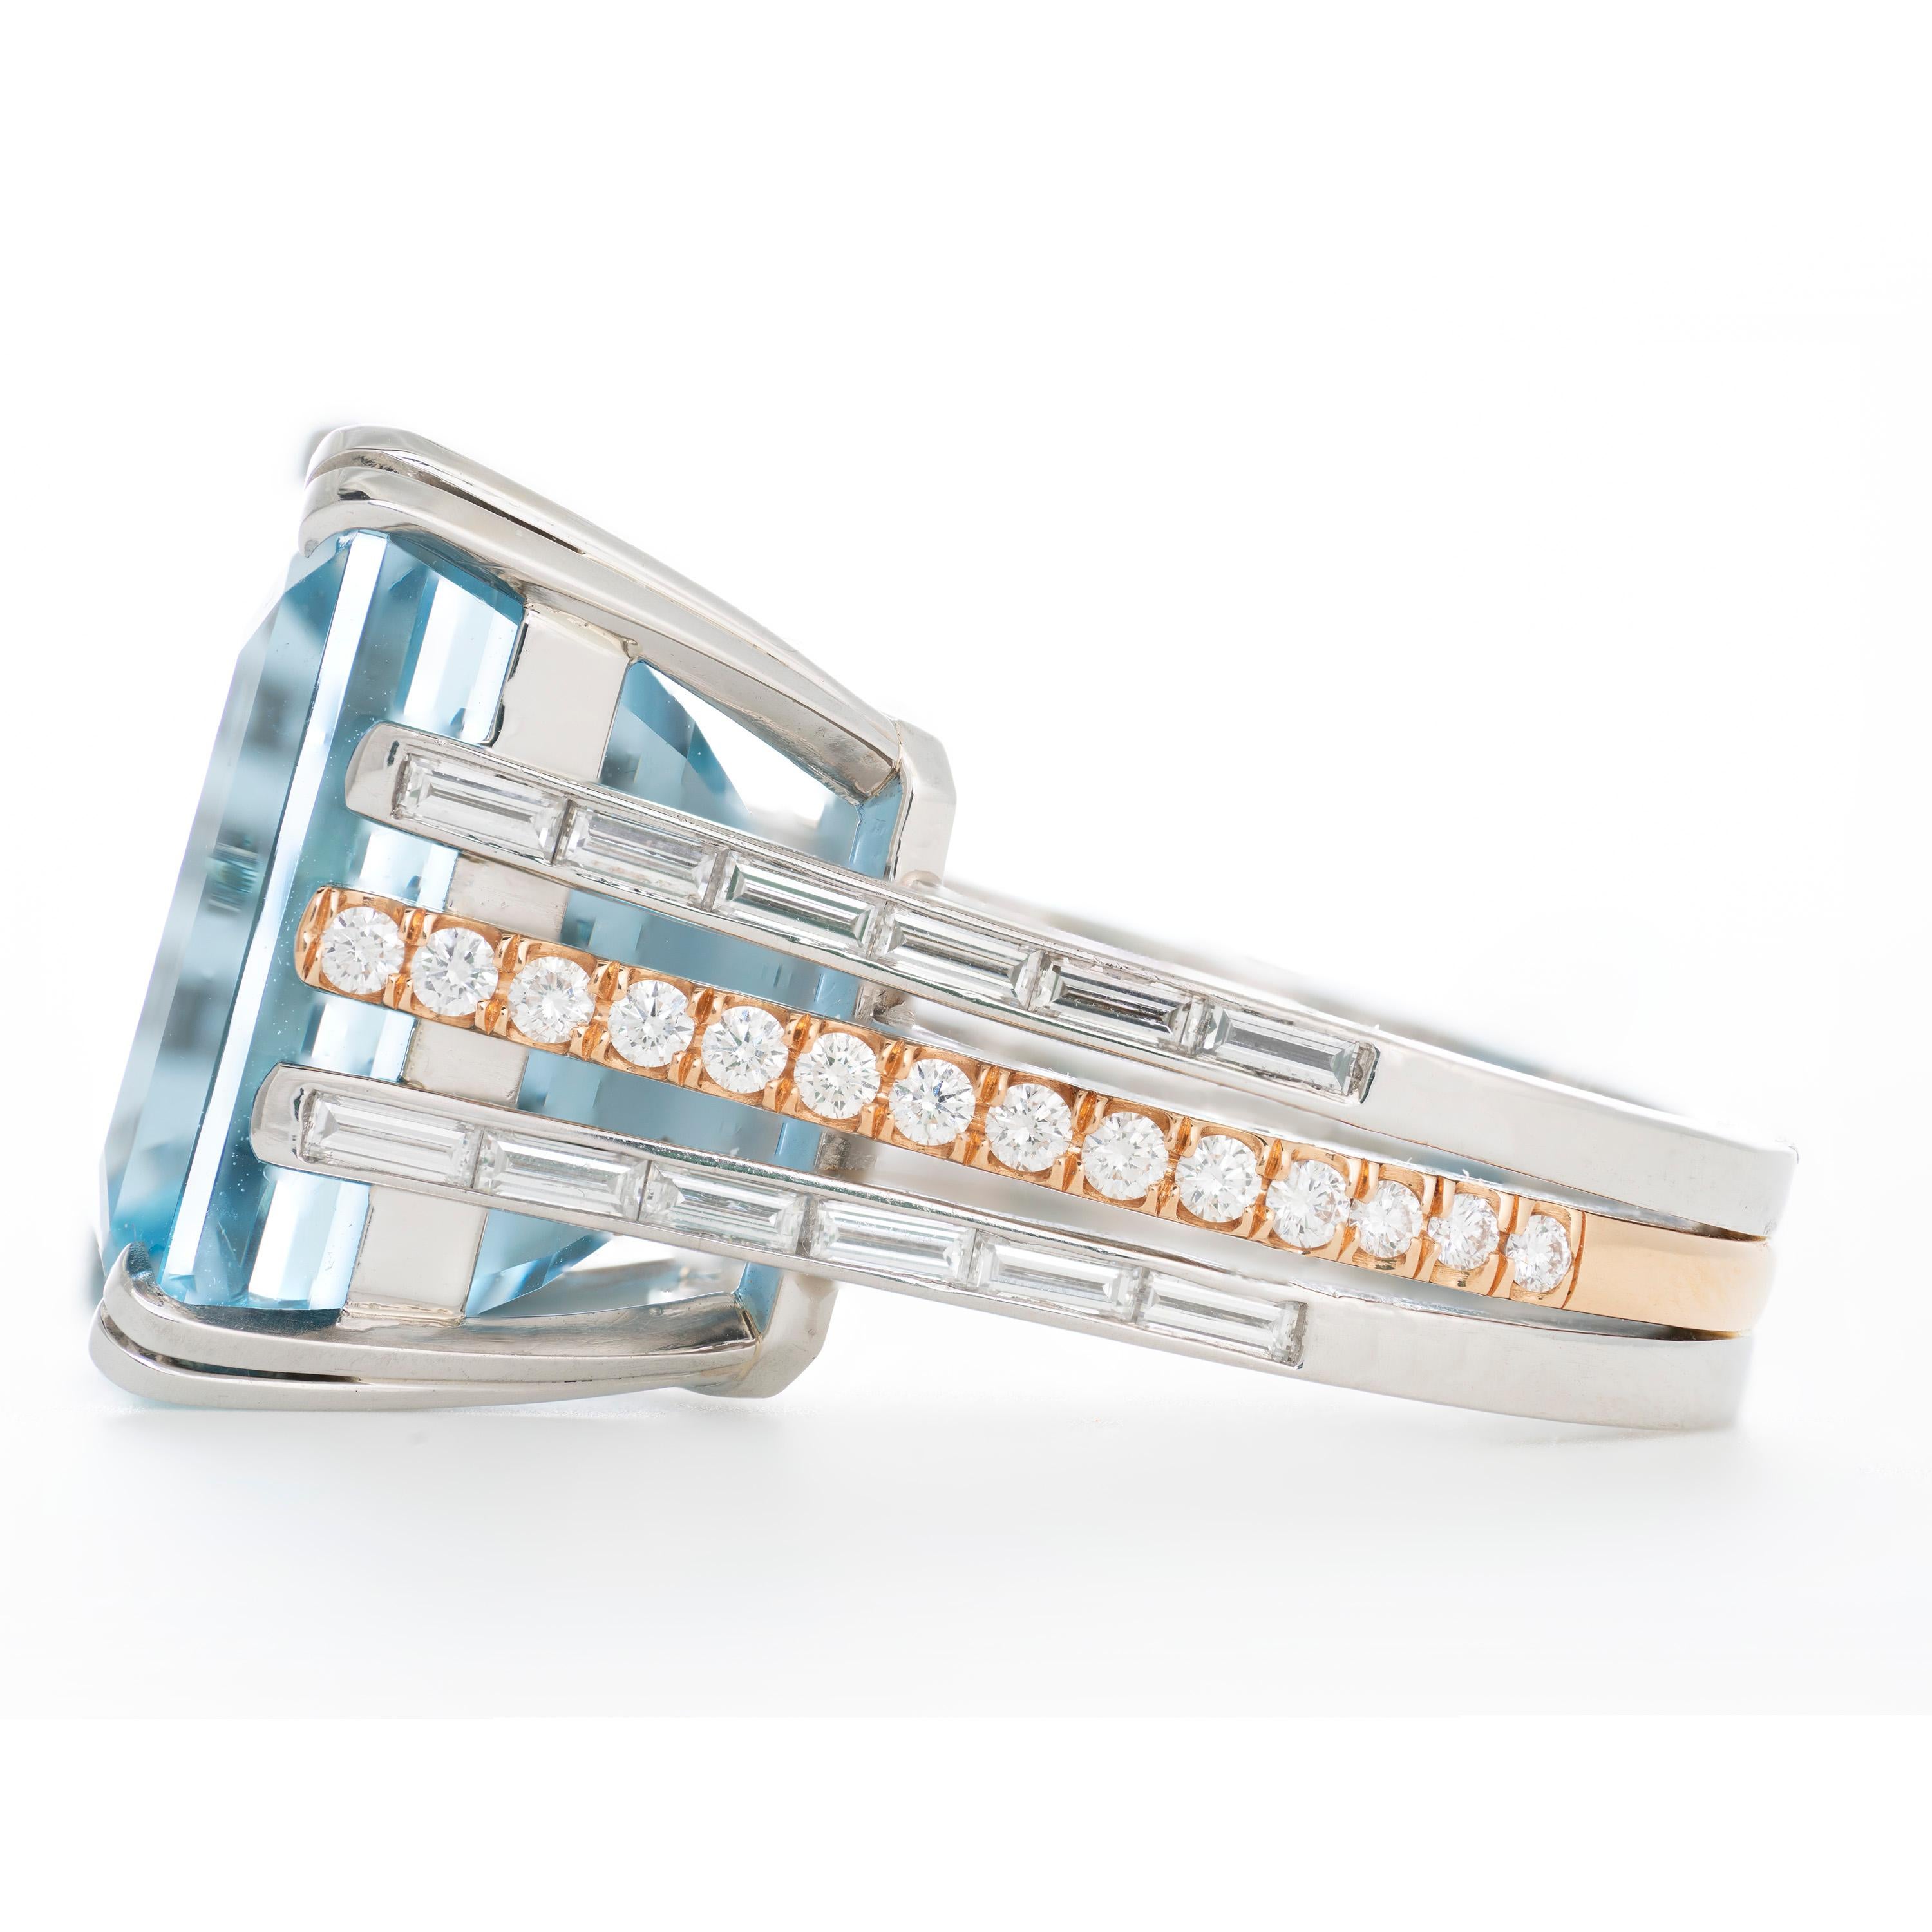 Expertly crafted in platinum & 18 karat rose gold by William Rosenberg, this stunning ring features a 25.67 carat emerald cut Aquamarine that was mined from the famous Santa Maria mine in the state of Minas Gerais, Brazil. The mine was discovered in